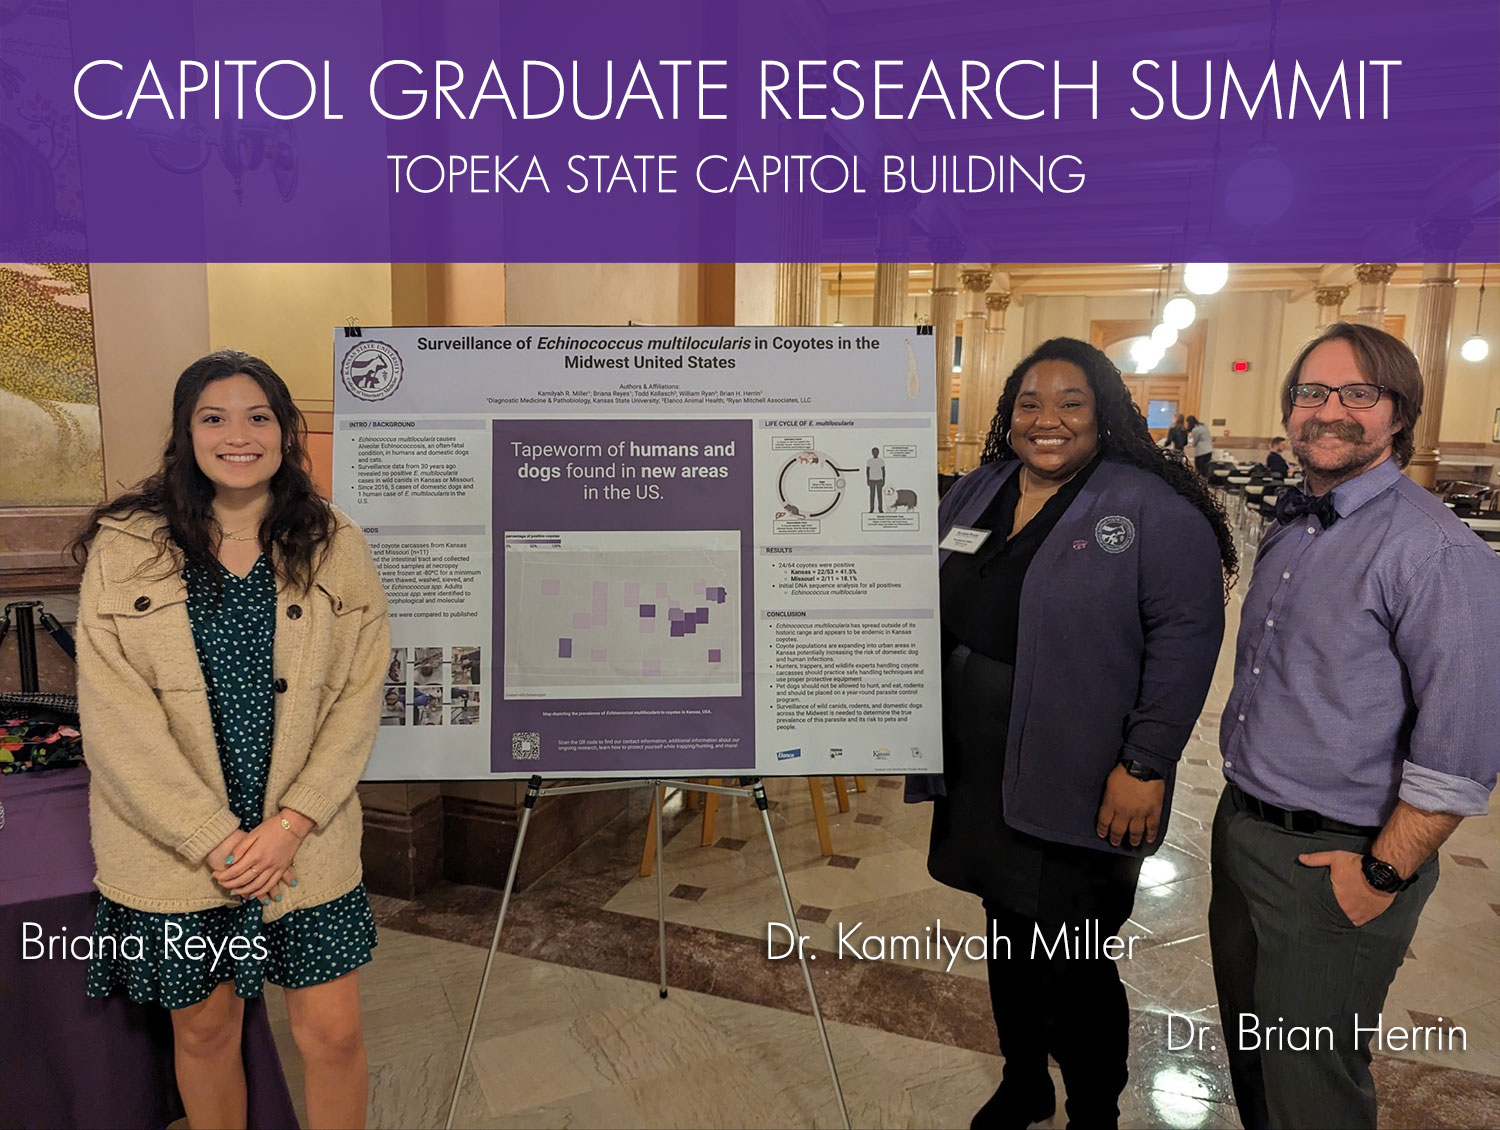 Dr. Kamilyah Miller presents research at the Capitol Building in Topeka